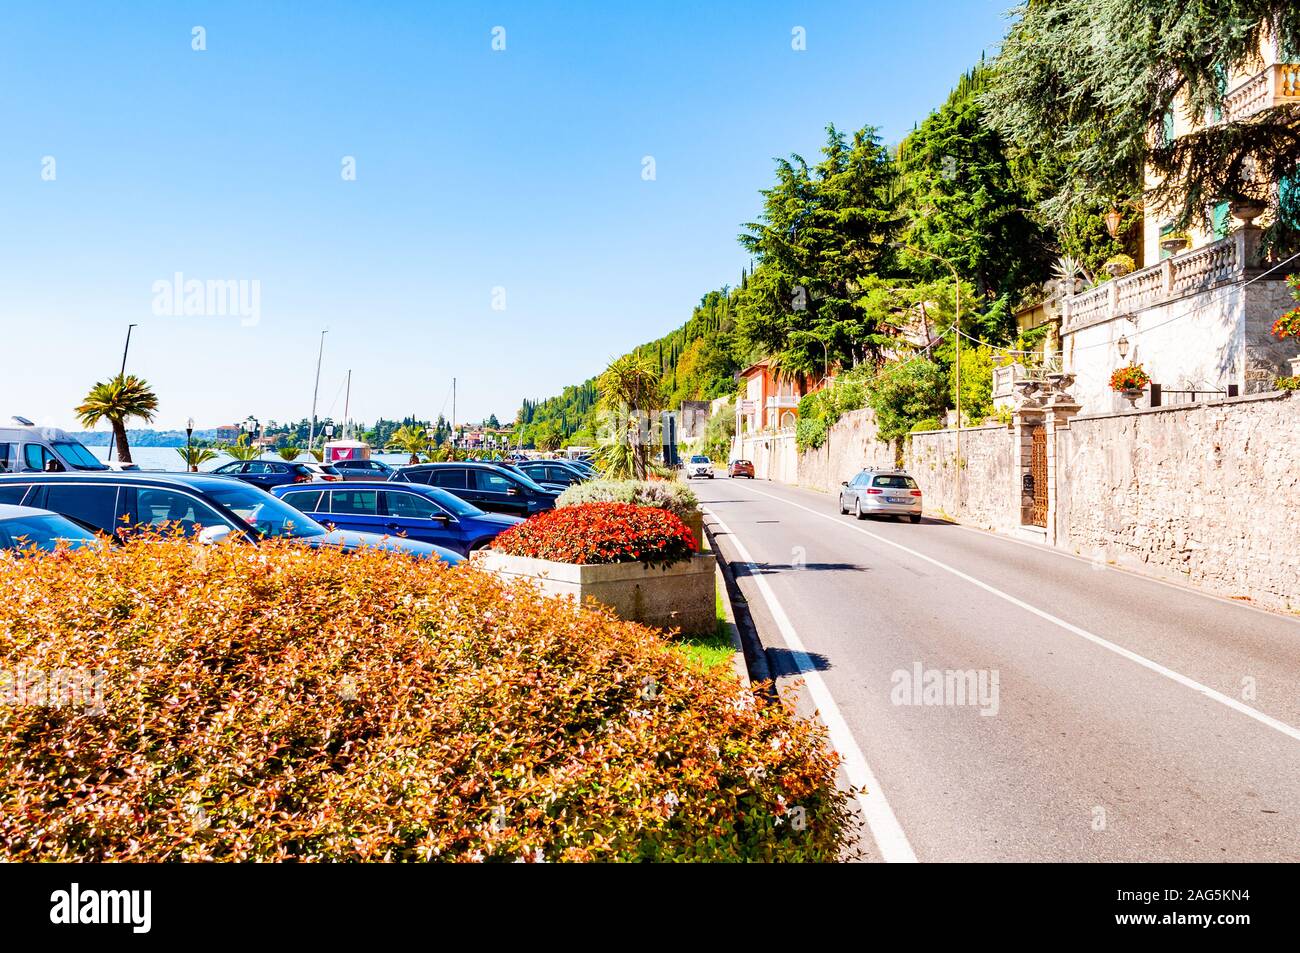 Toscolano Maderno, Lombardy, Italy - September 12, 2019: Scenic panoramic beltway road around lake Garda with medieval architecture buildings and rich Stock Photo